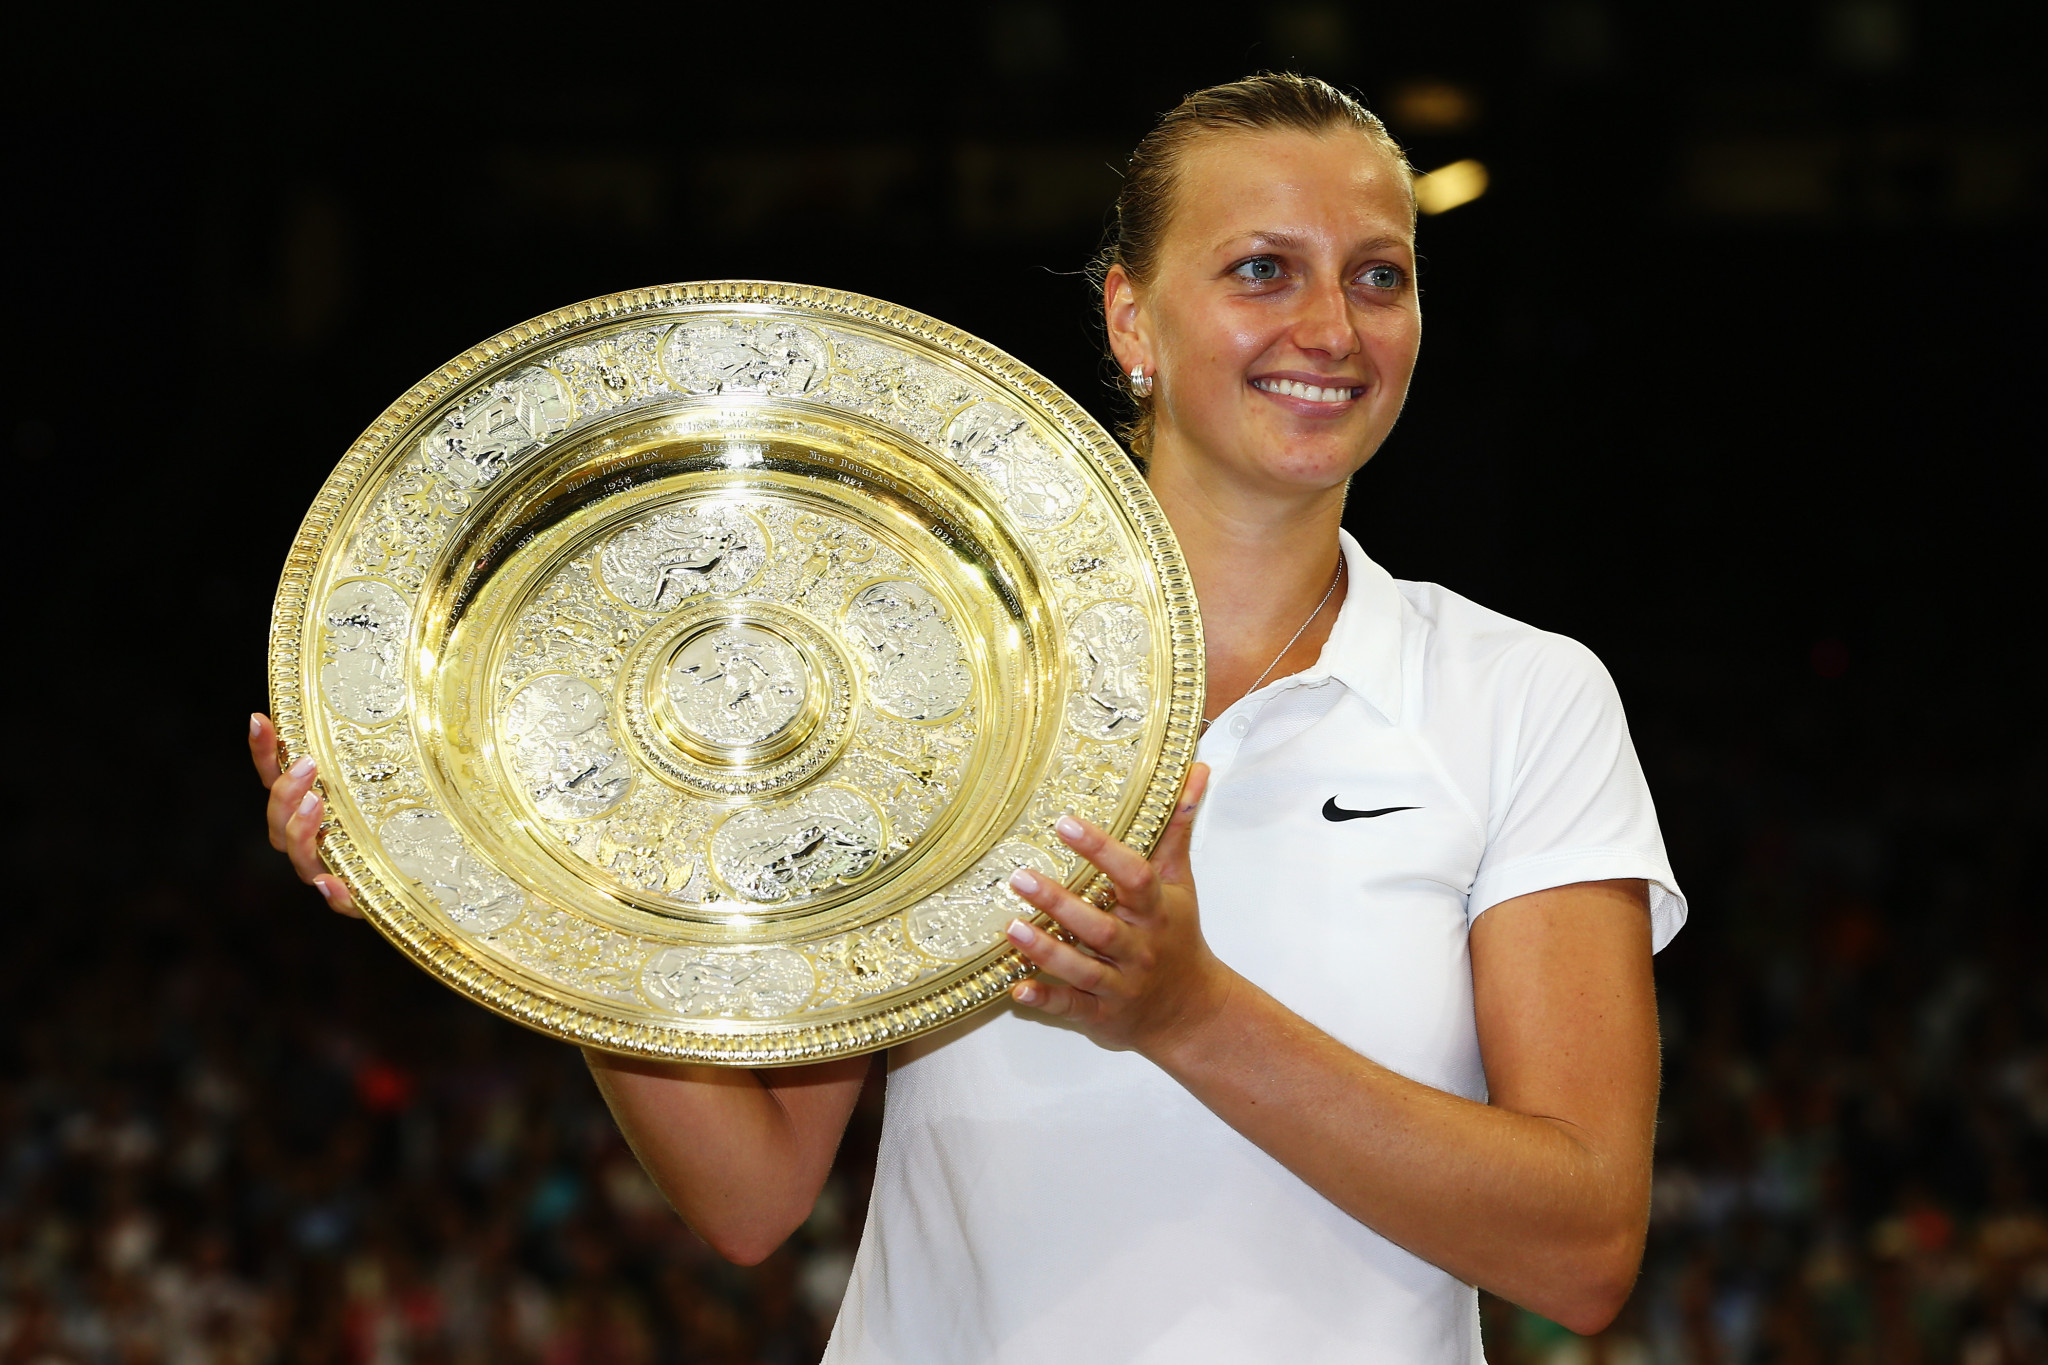 Petra Kvitová has won Wimbledon twice, in 2011 and 2014 ©Getty Images